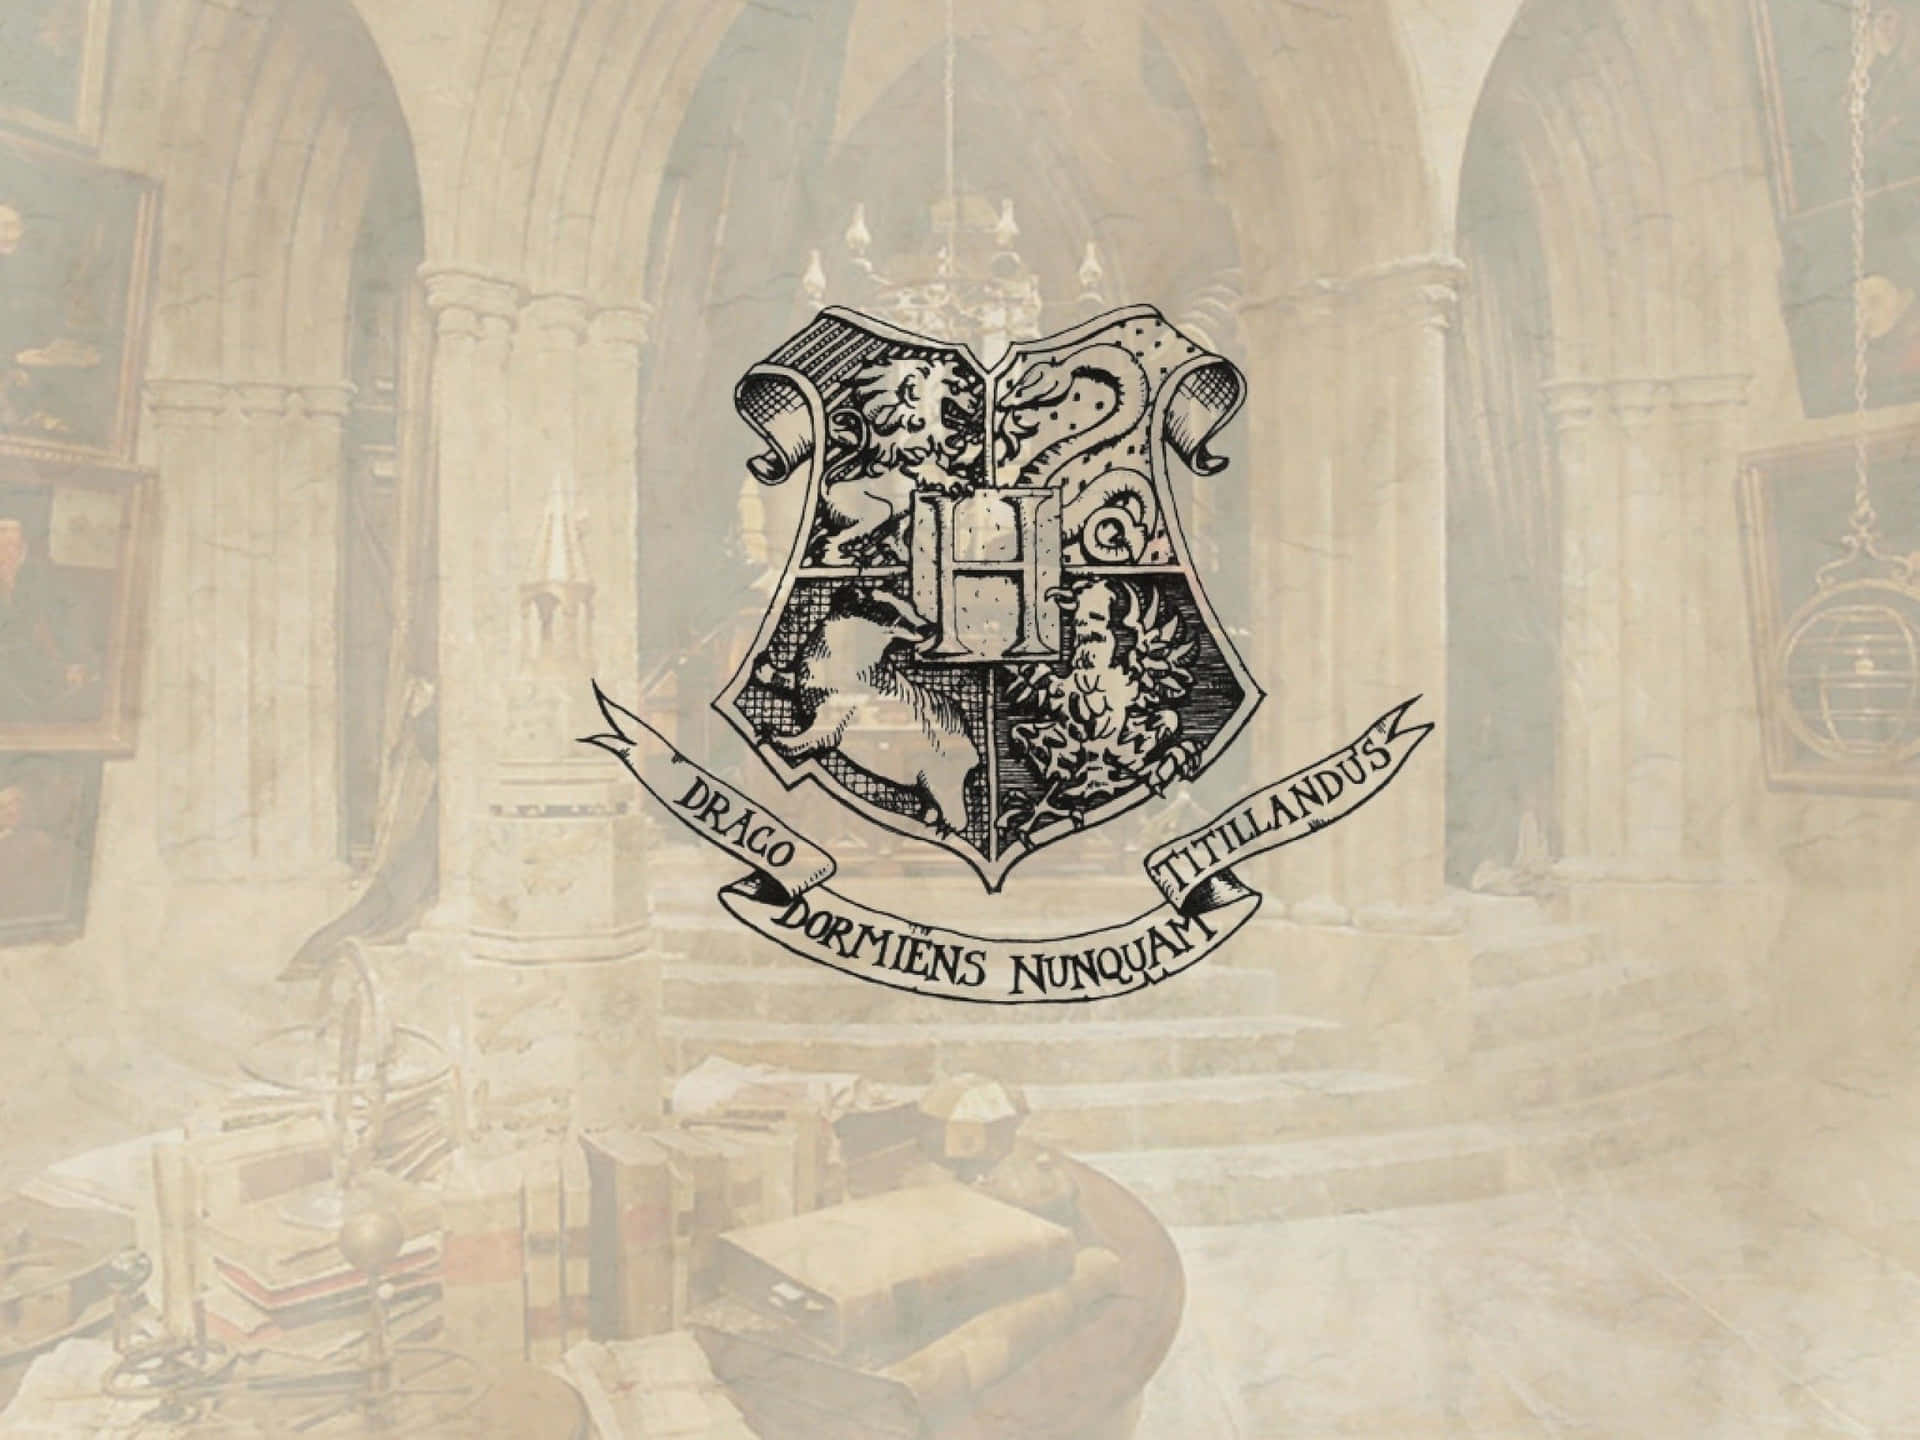 Majestic Hogwarts Crest featuring the four houses Wallpaper